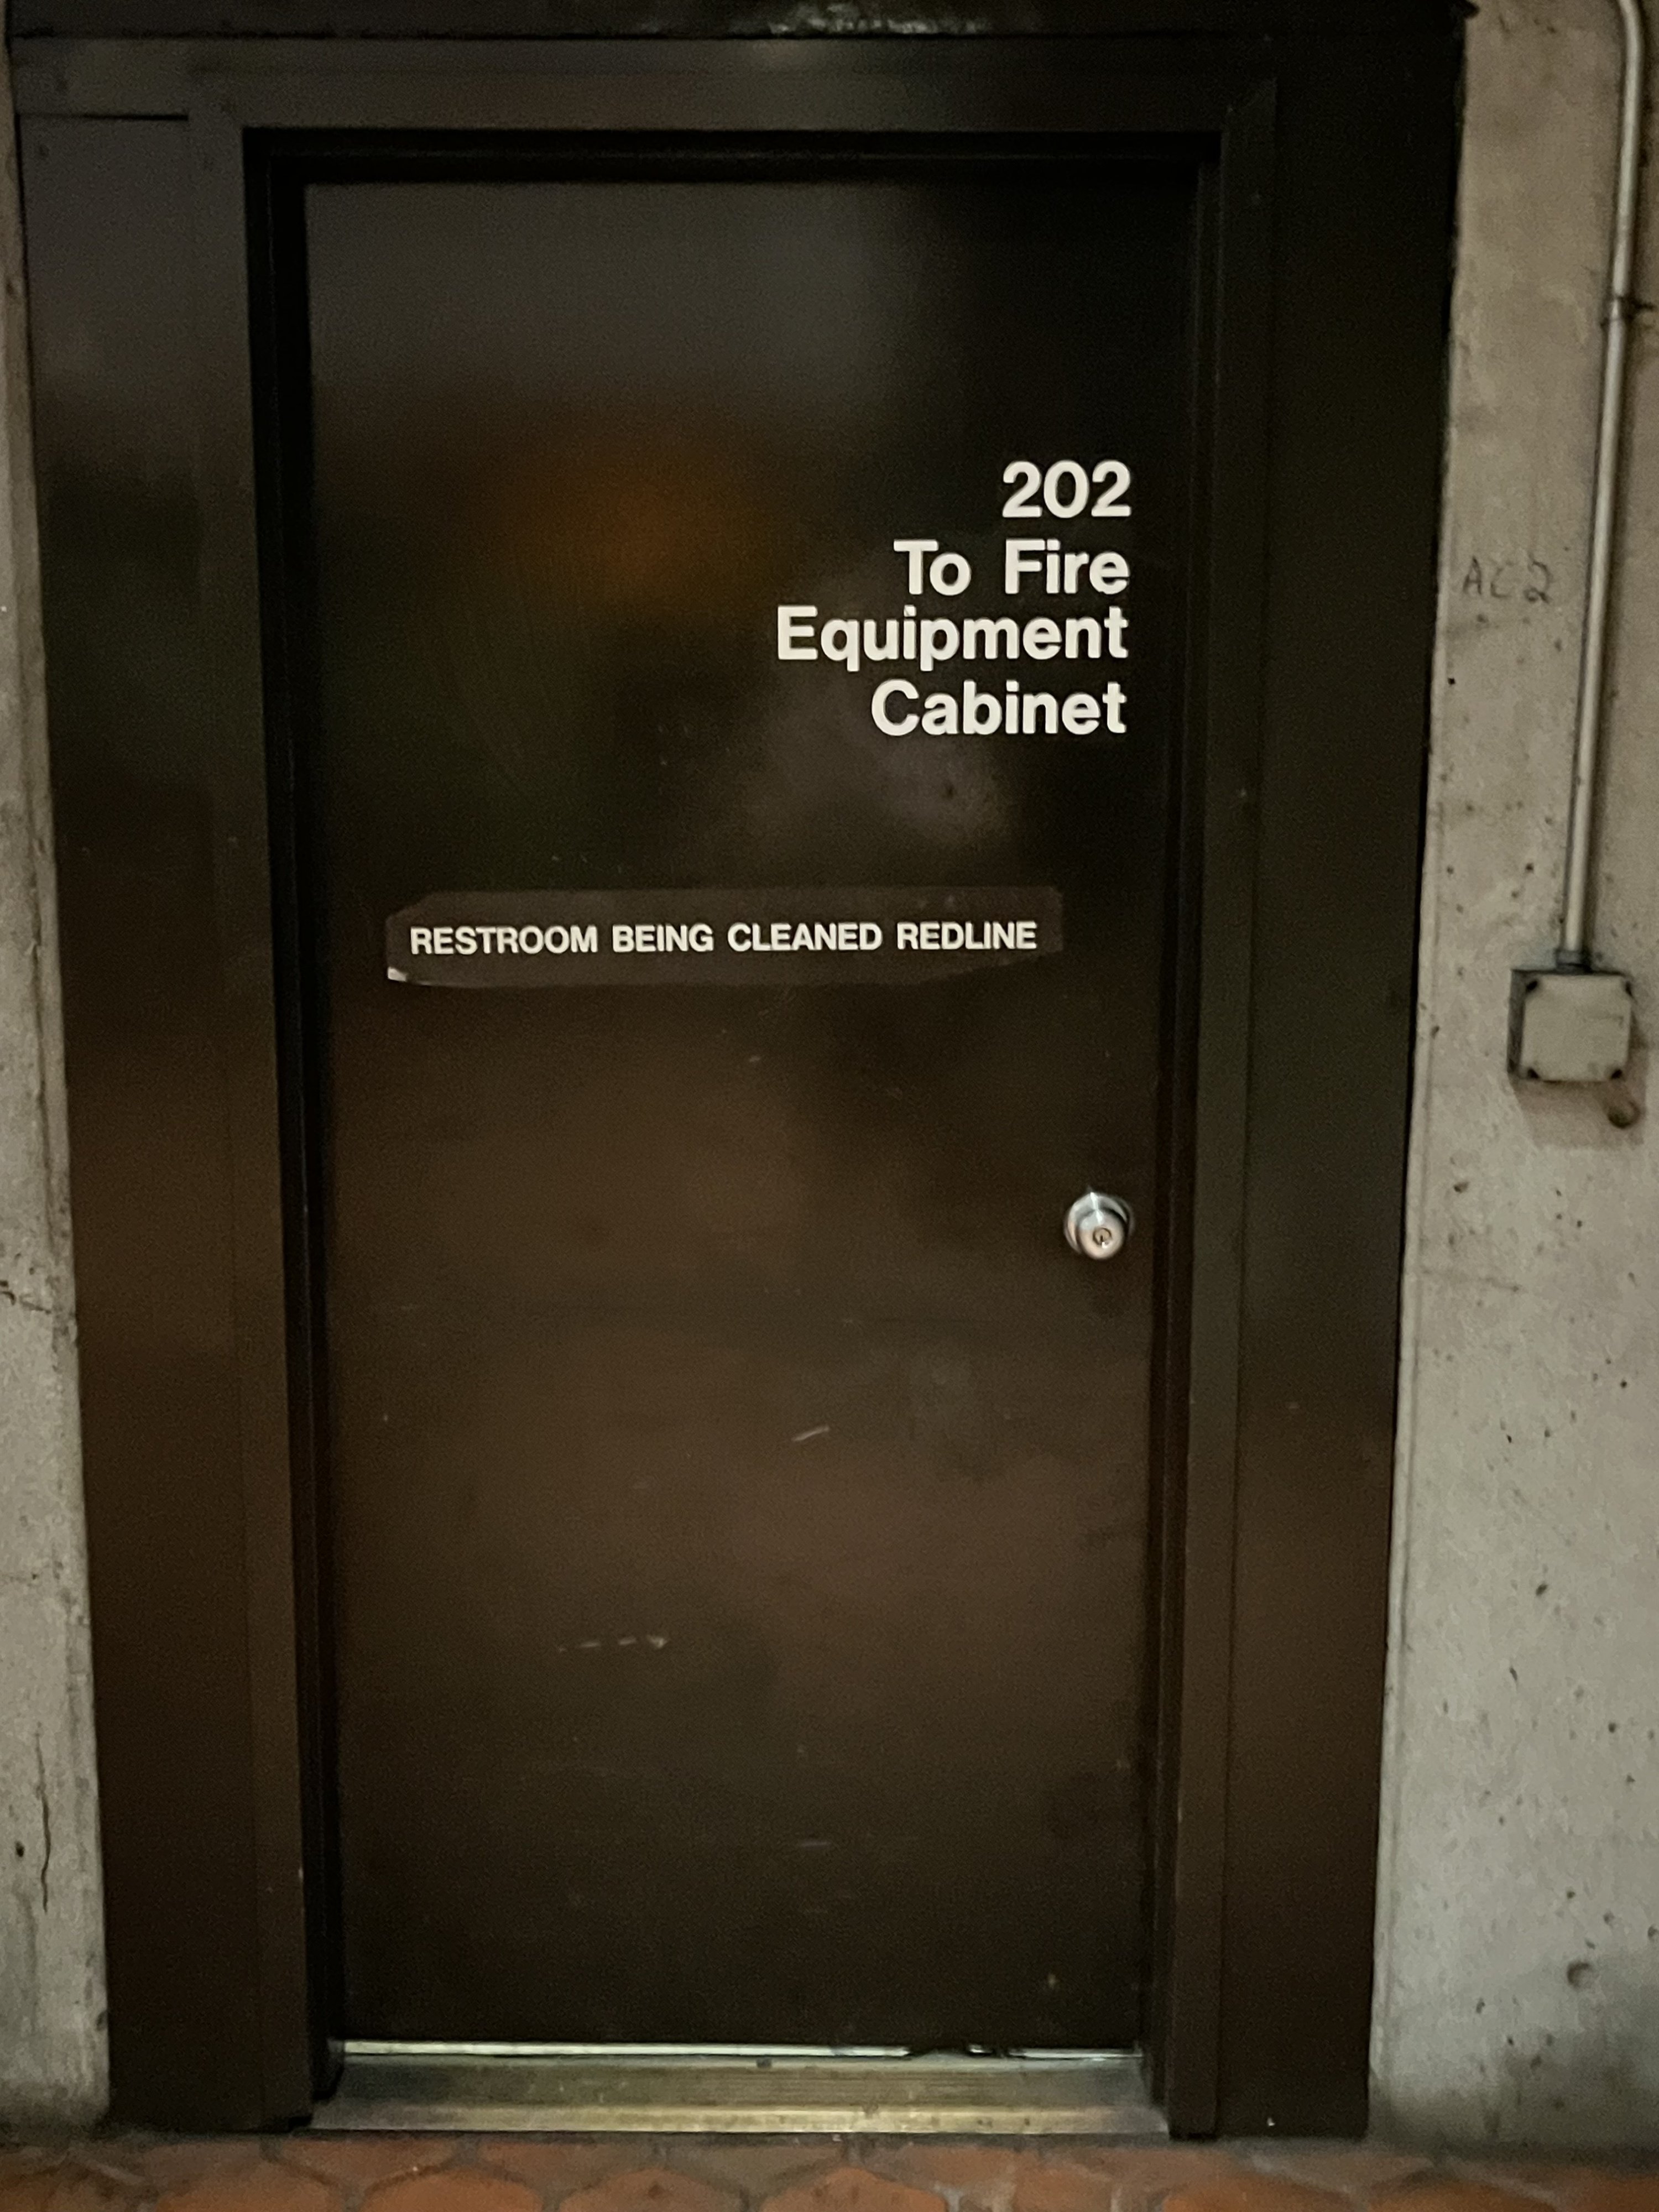 The door to the bathroom at the Van Ness WMATA station.